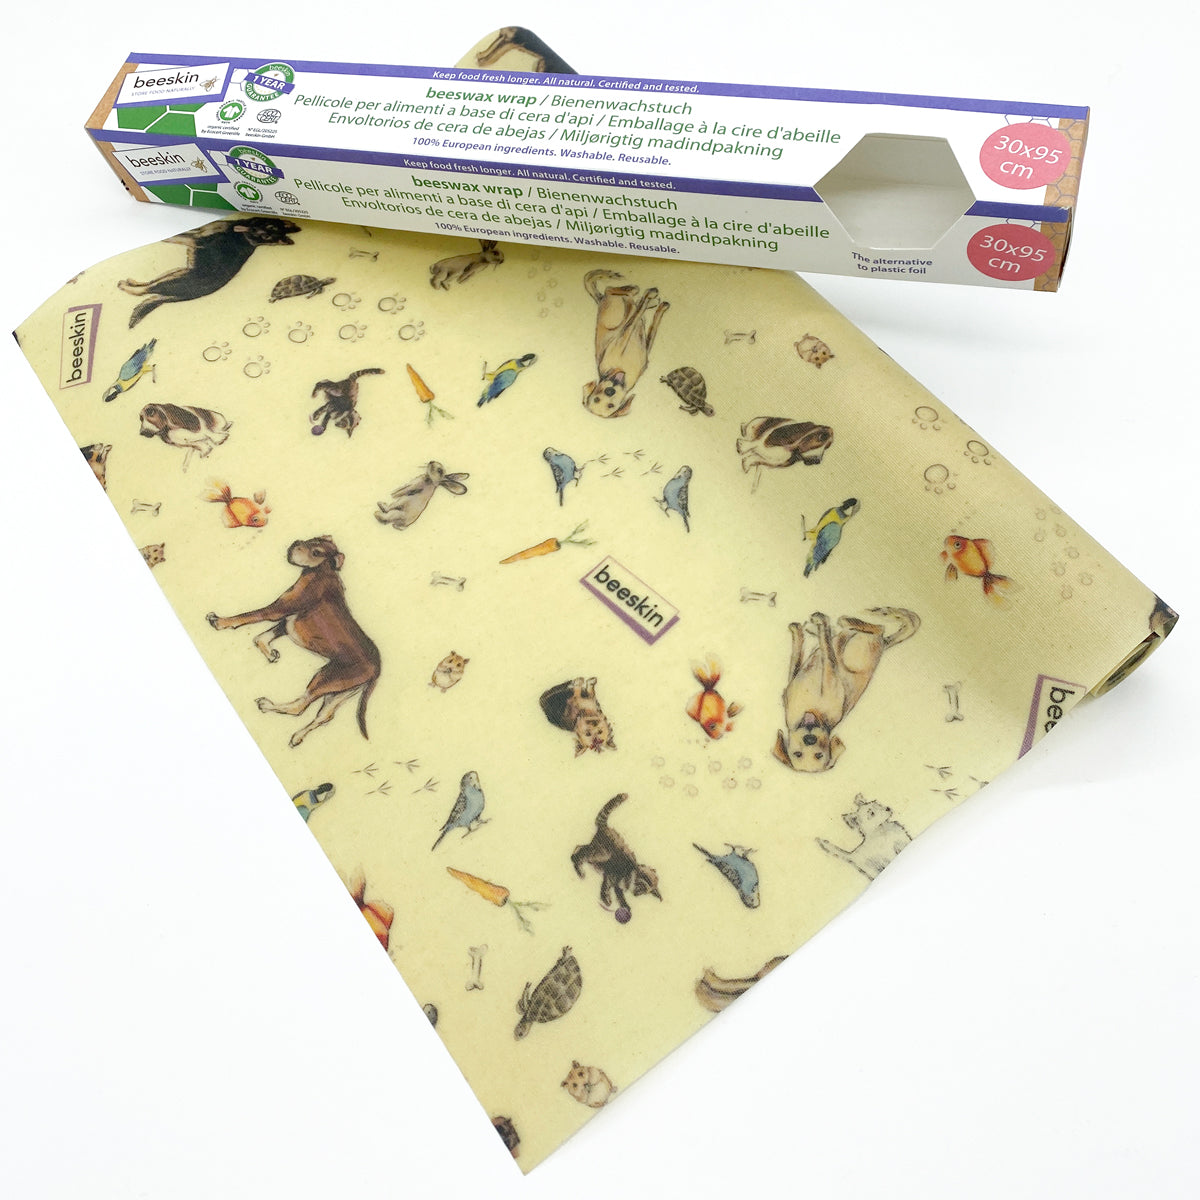 beeskin beeswax roll pets design next to packaging